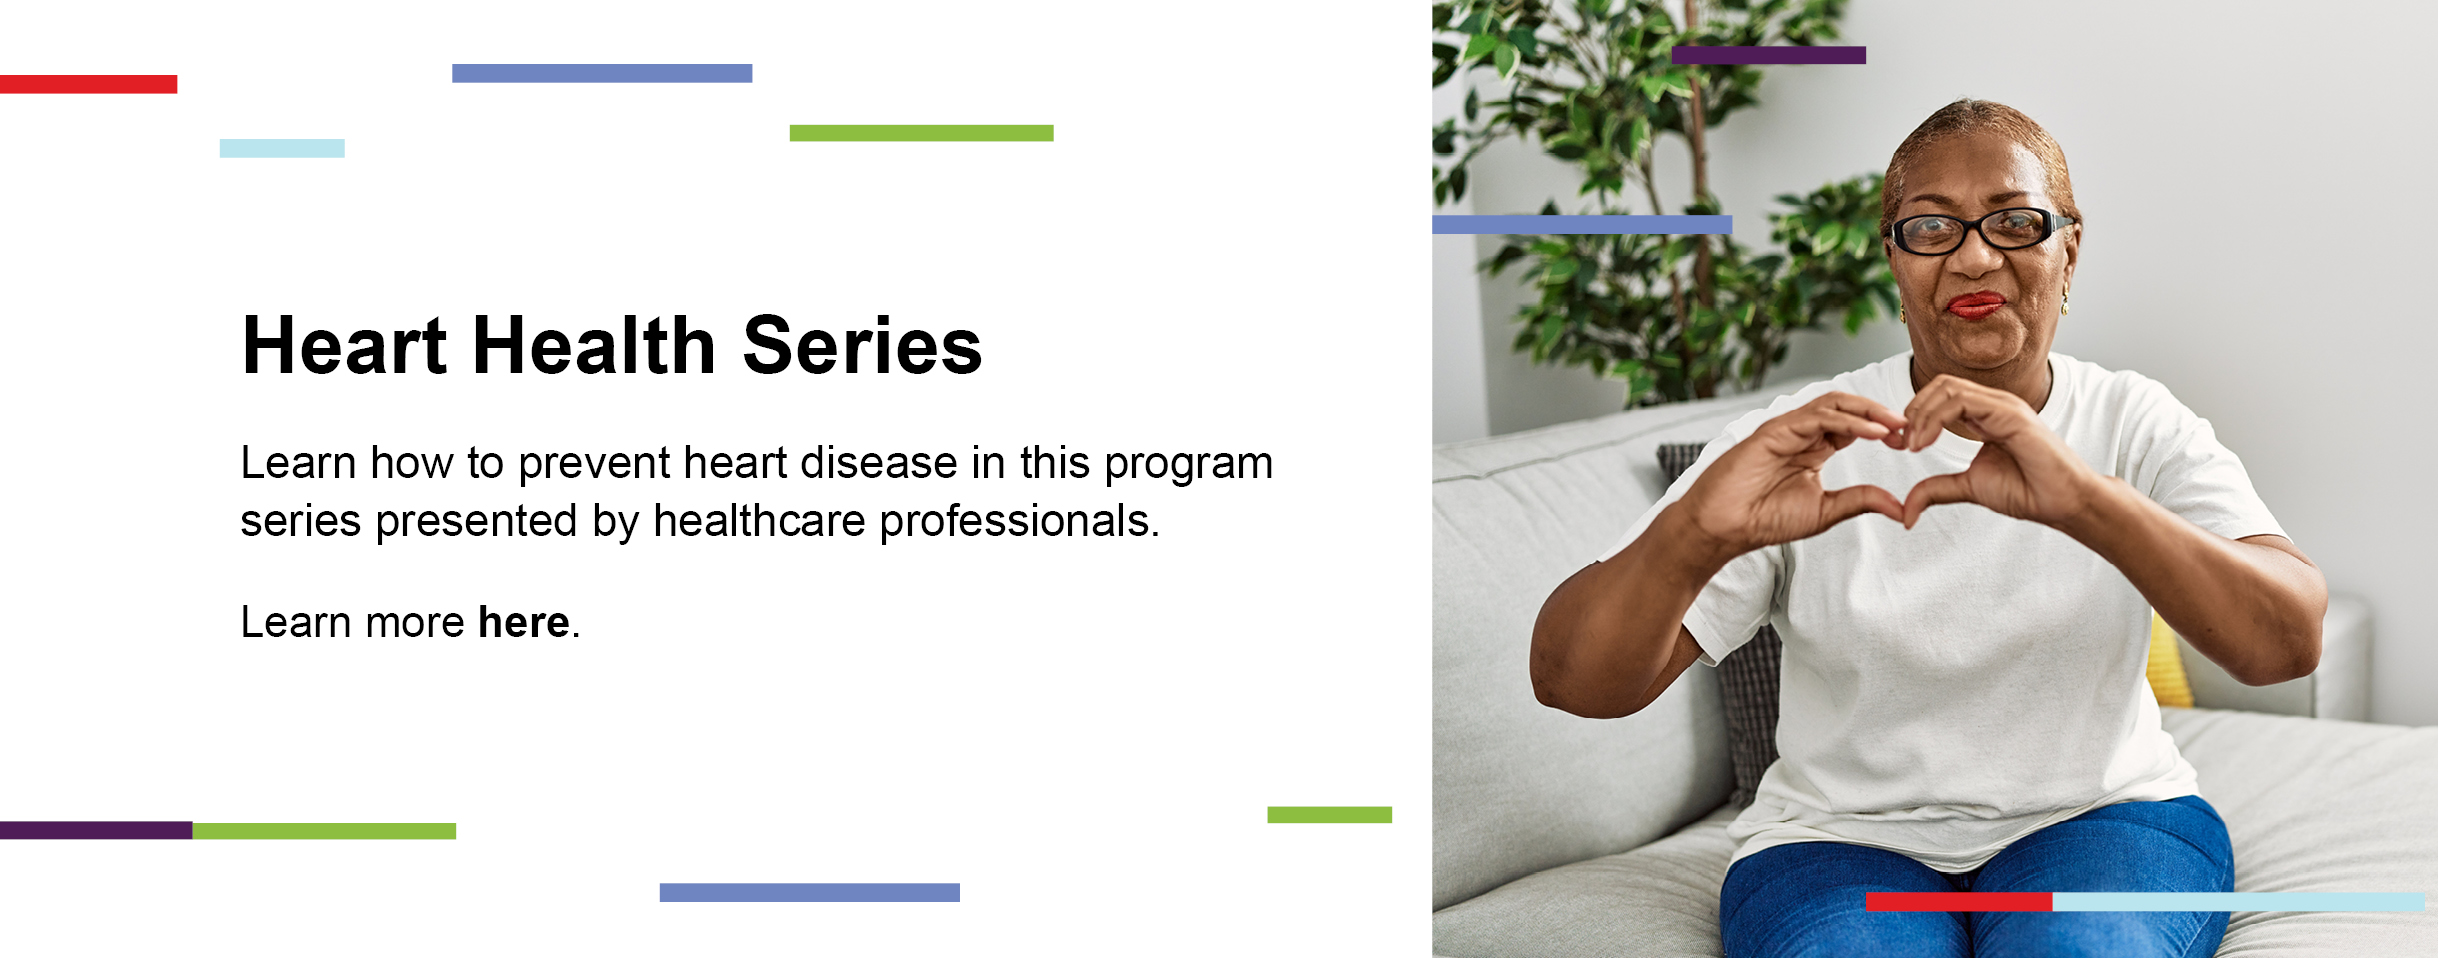 Heart Health Series. Learn how to prevent heart disease in this program series presented by healthcare professionals. Learn more here. 